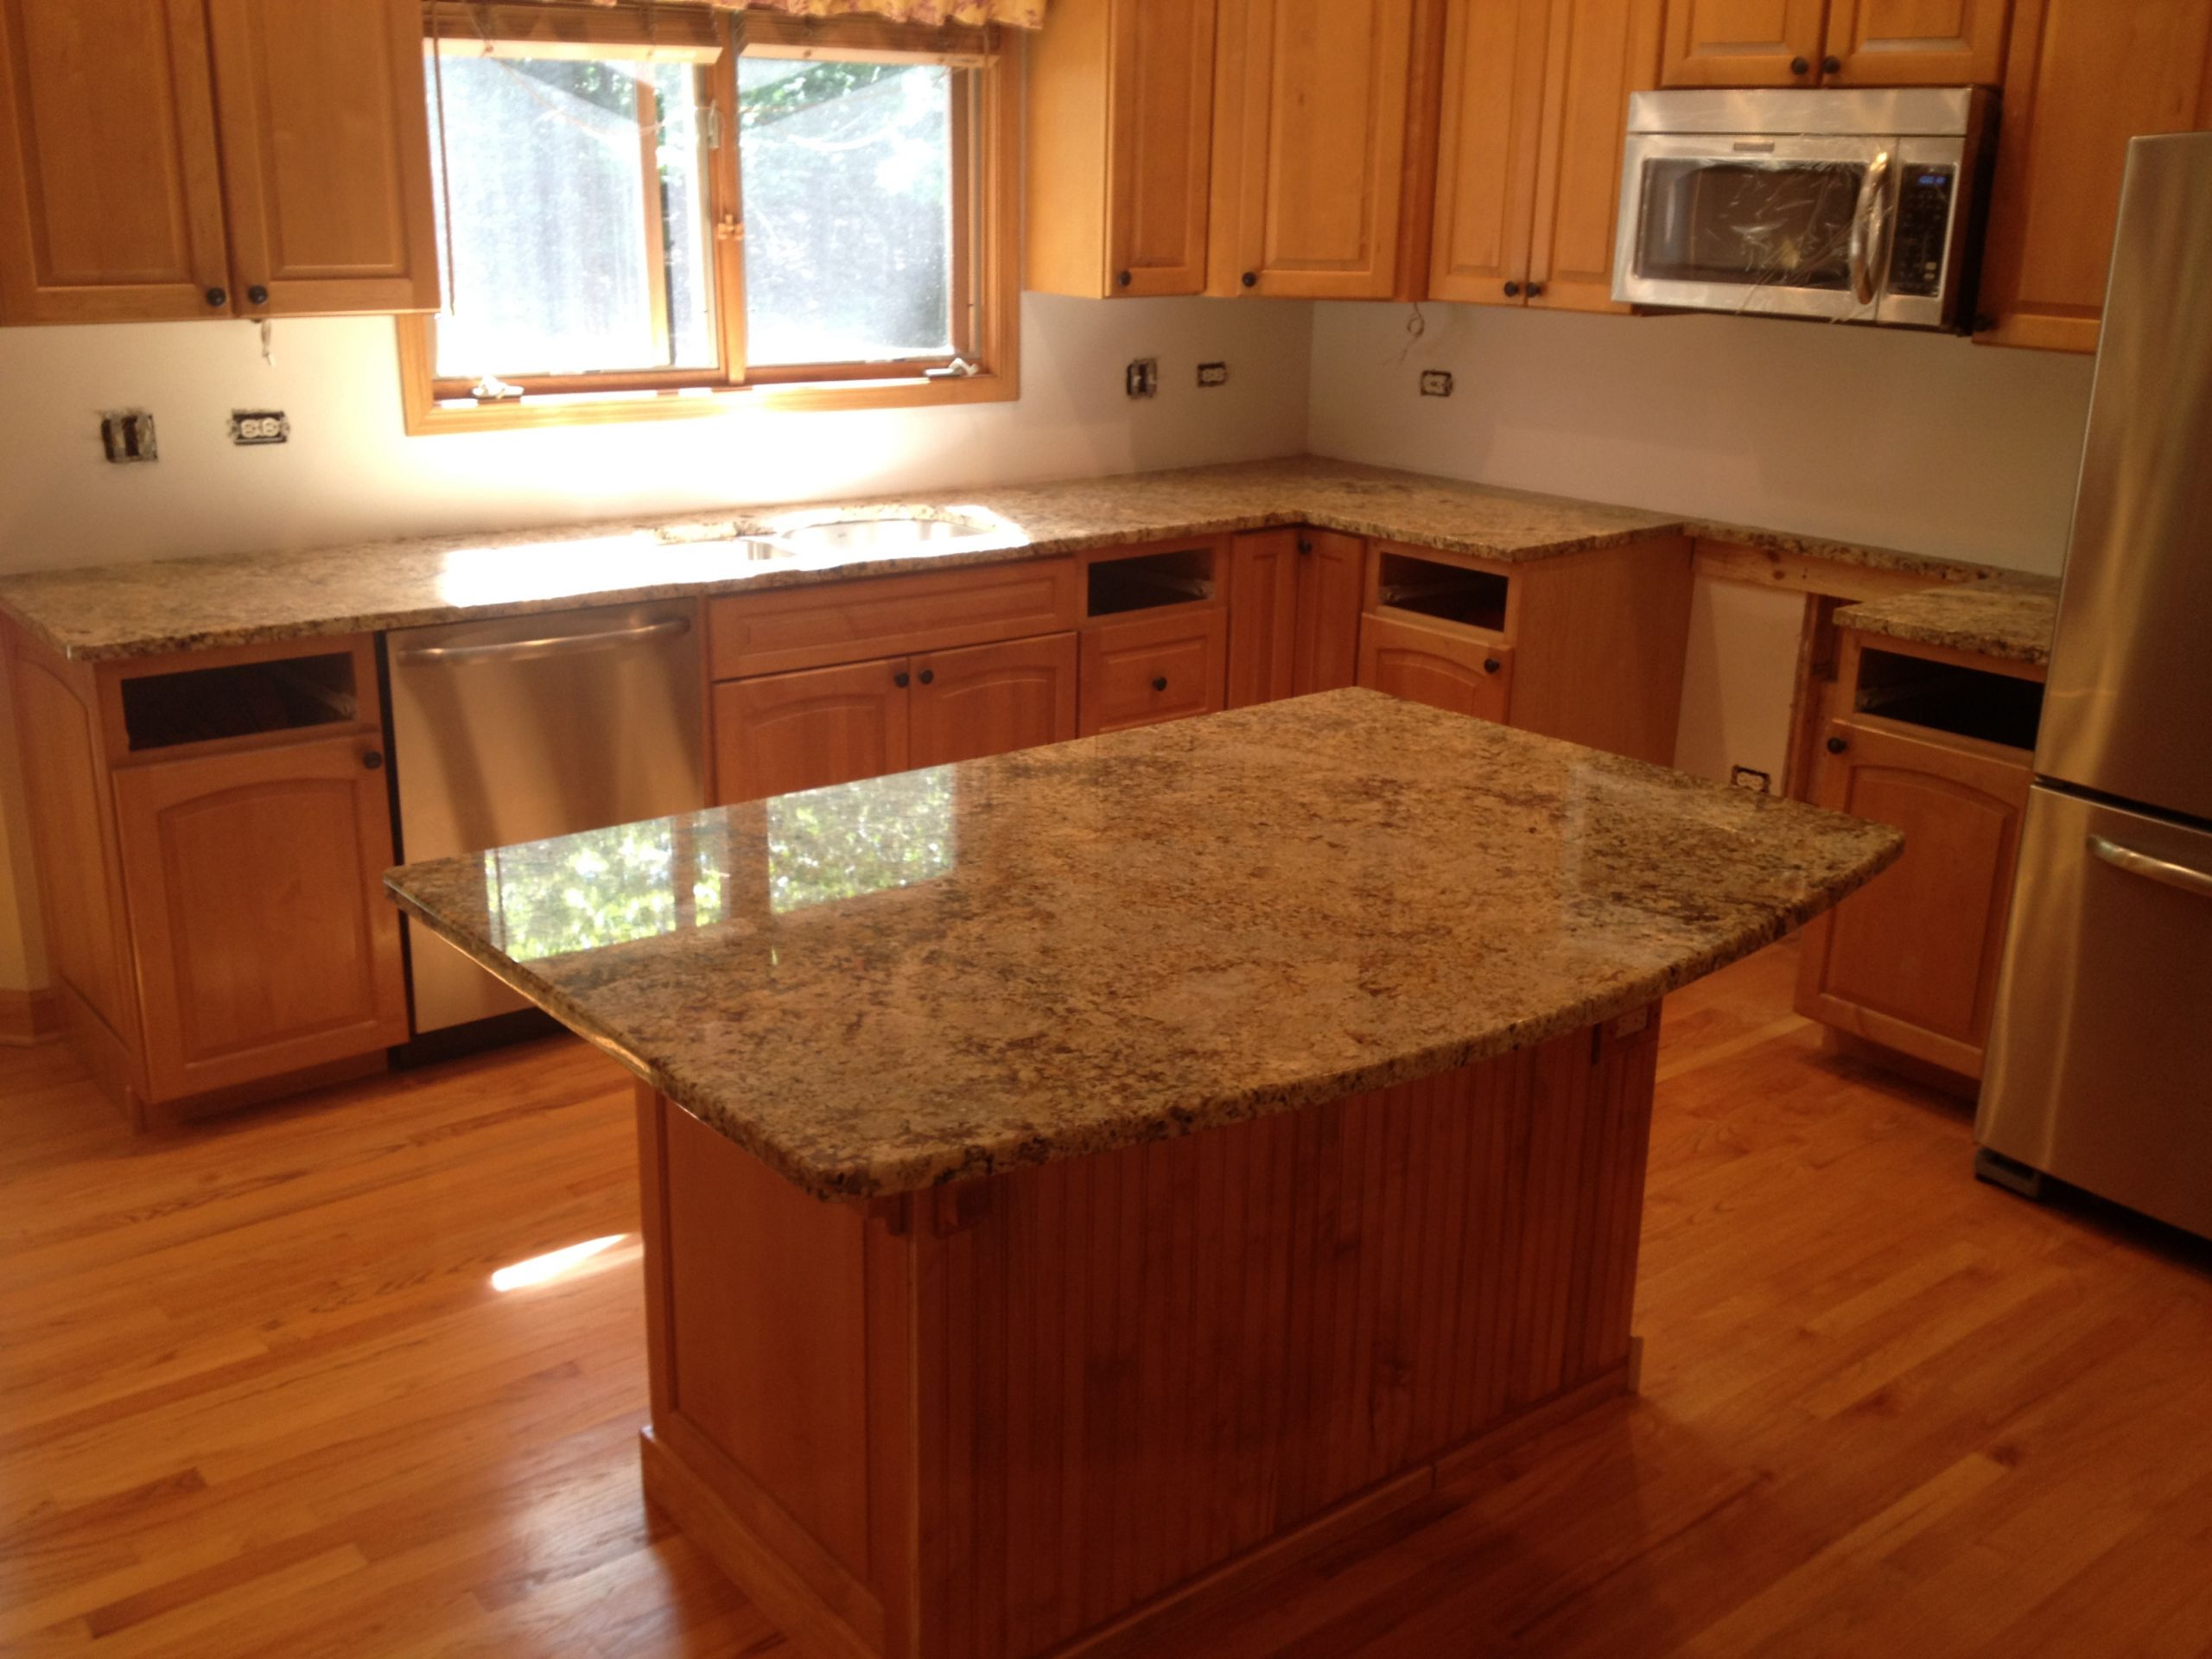 Kitchen Countertops Lowes
 Kitchen Absolute Granite Tile Lowes Design For Classy